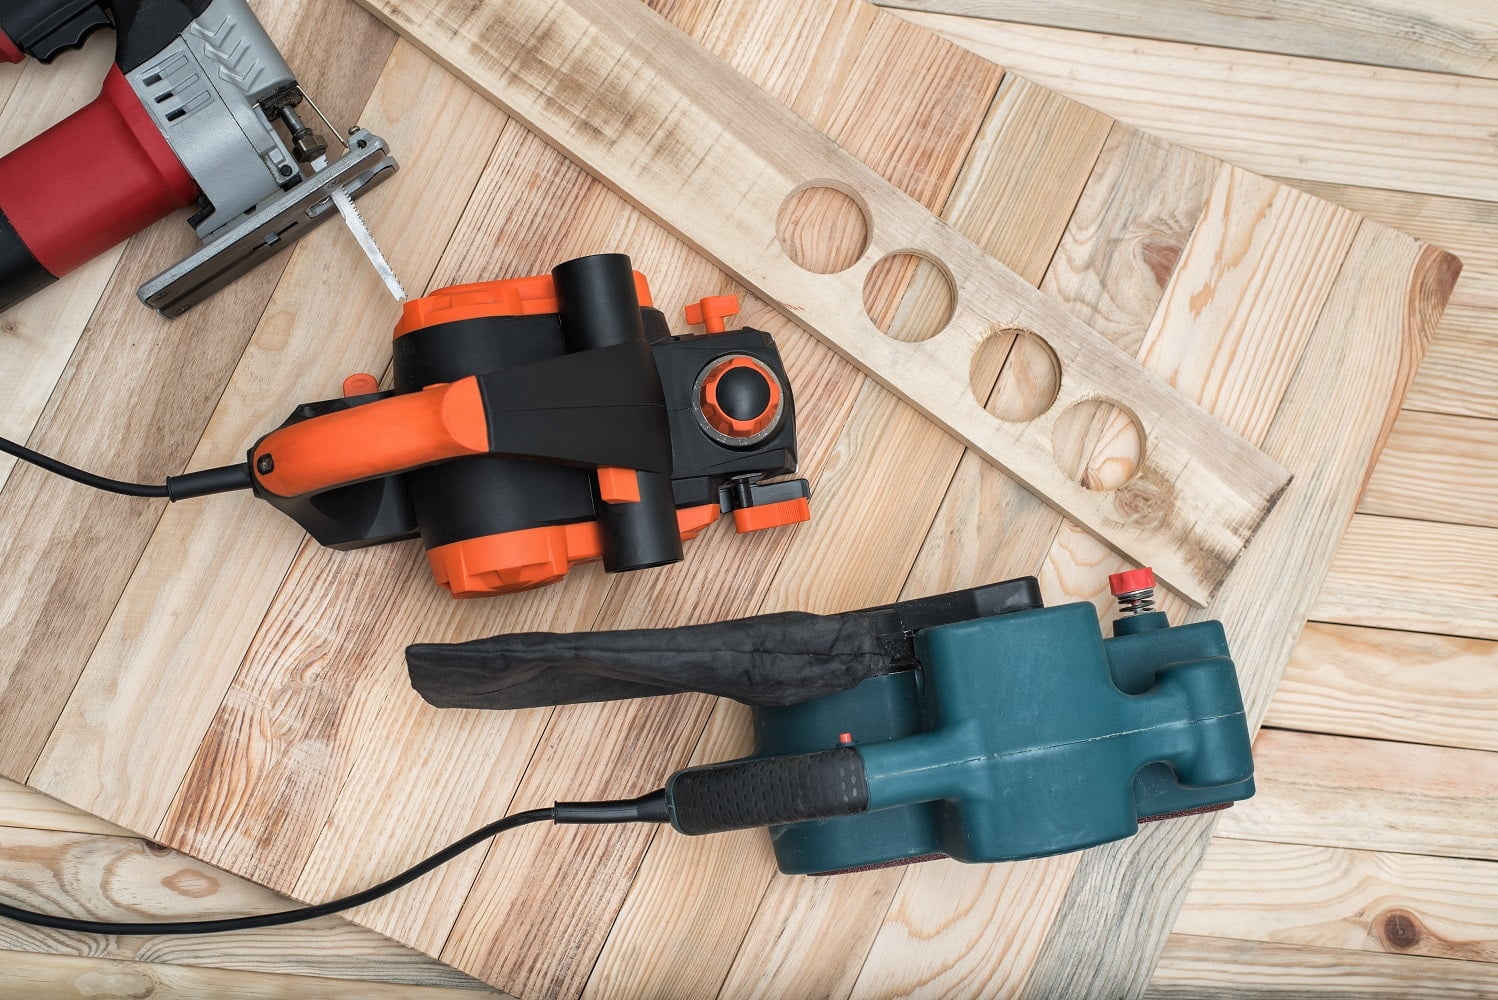 Set of handheld woodworking power tools for woodworking and the workpiece lies on a light wooden background